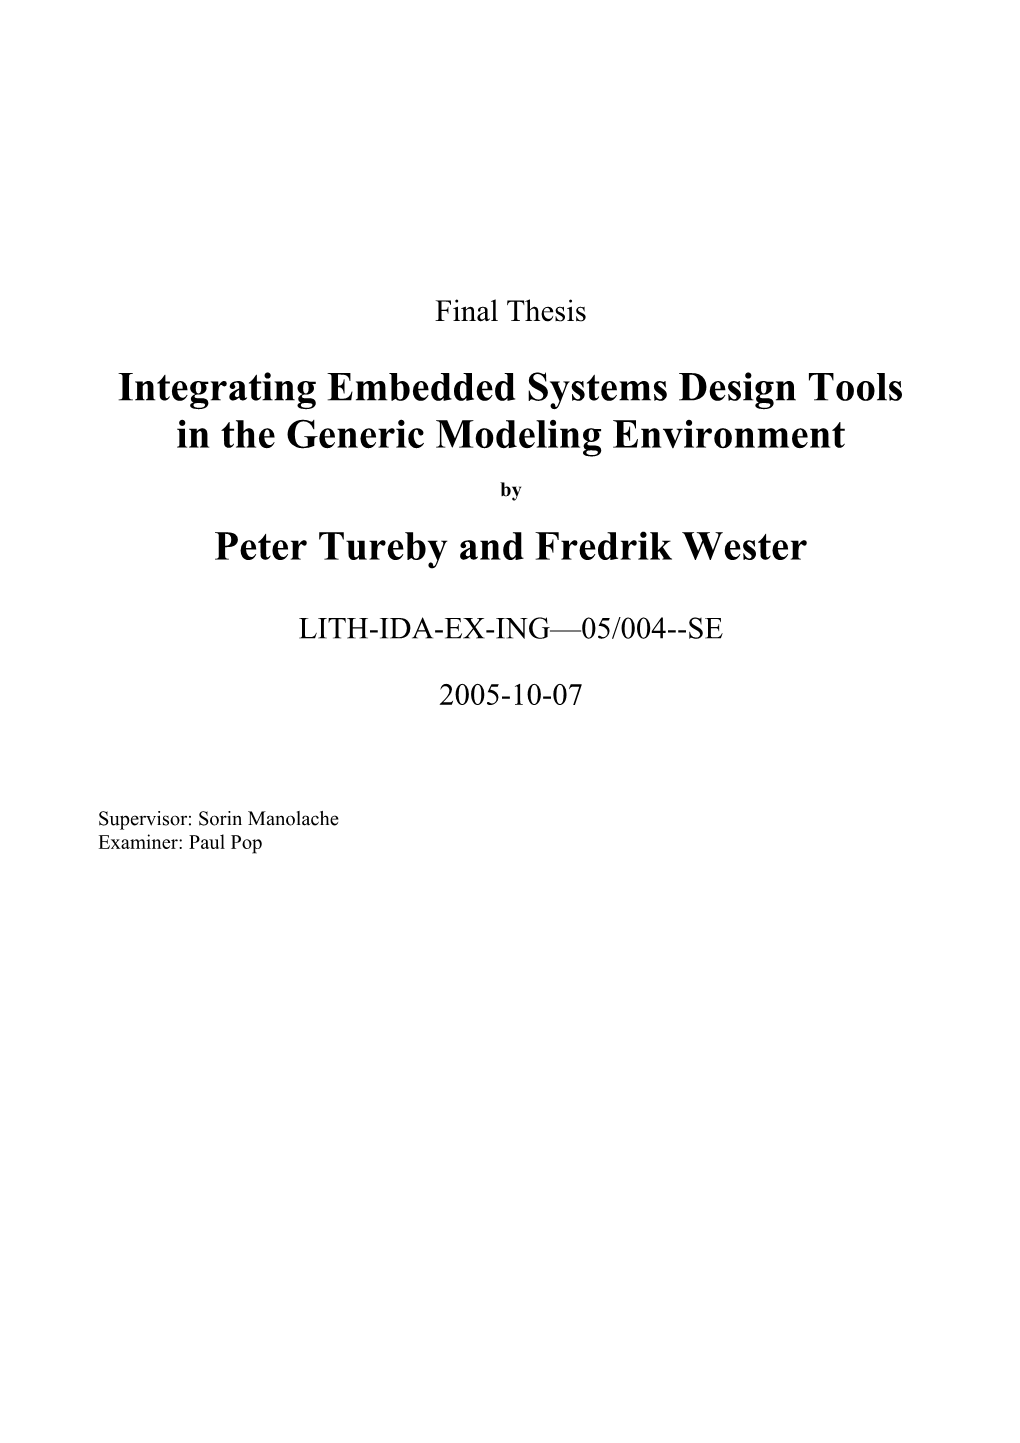 Integrating Embedded System Design Tools in the Generic Modeling Environment